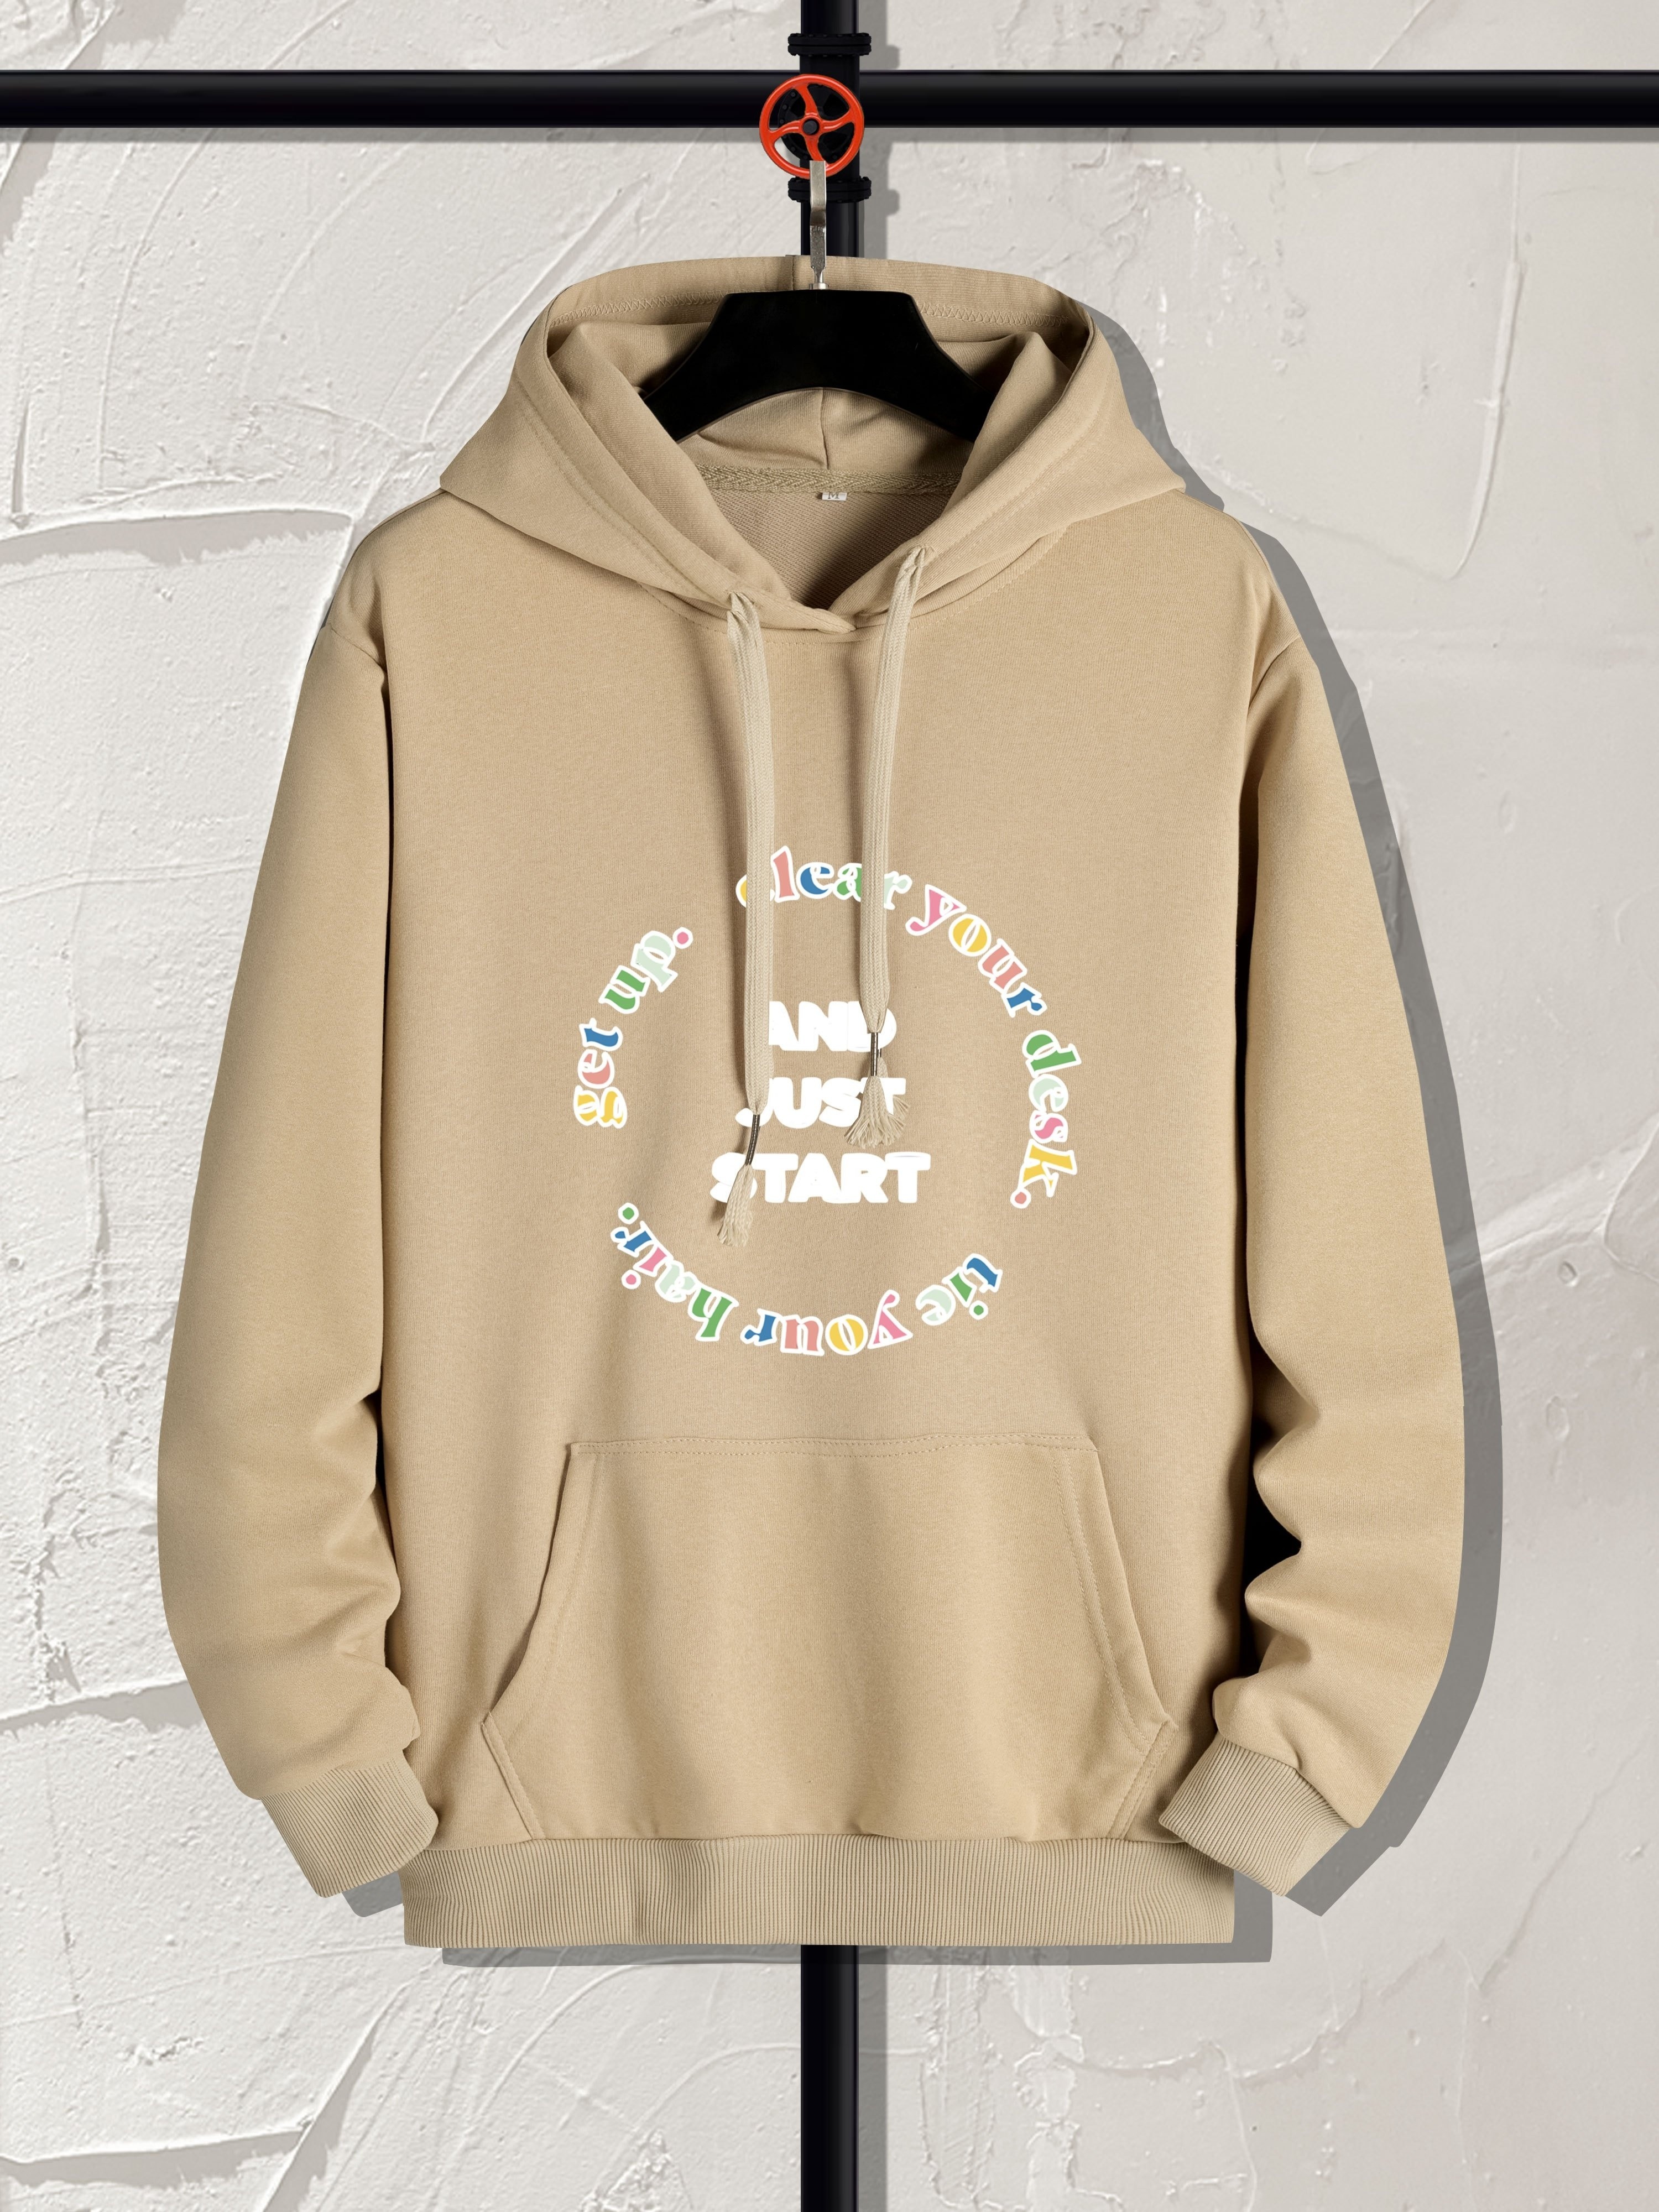 Why Is It so Hard to Get an Astroworld Hoodie?